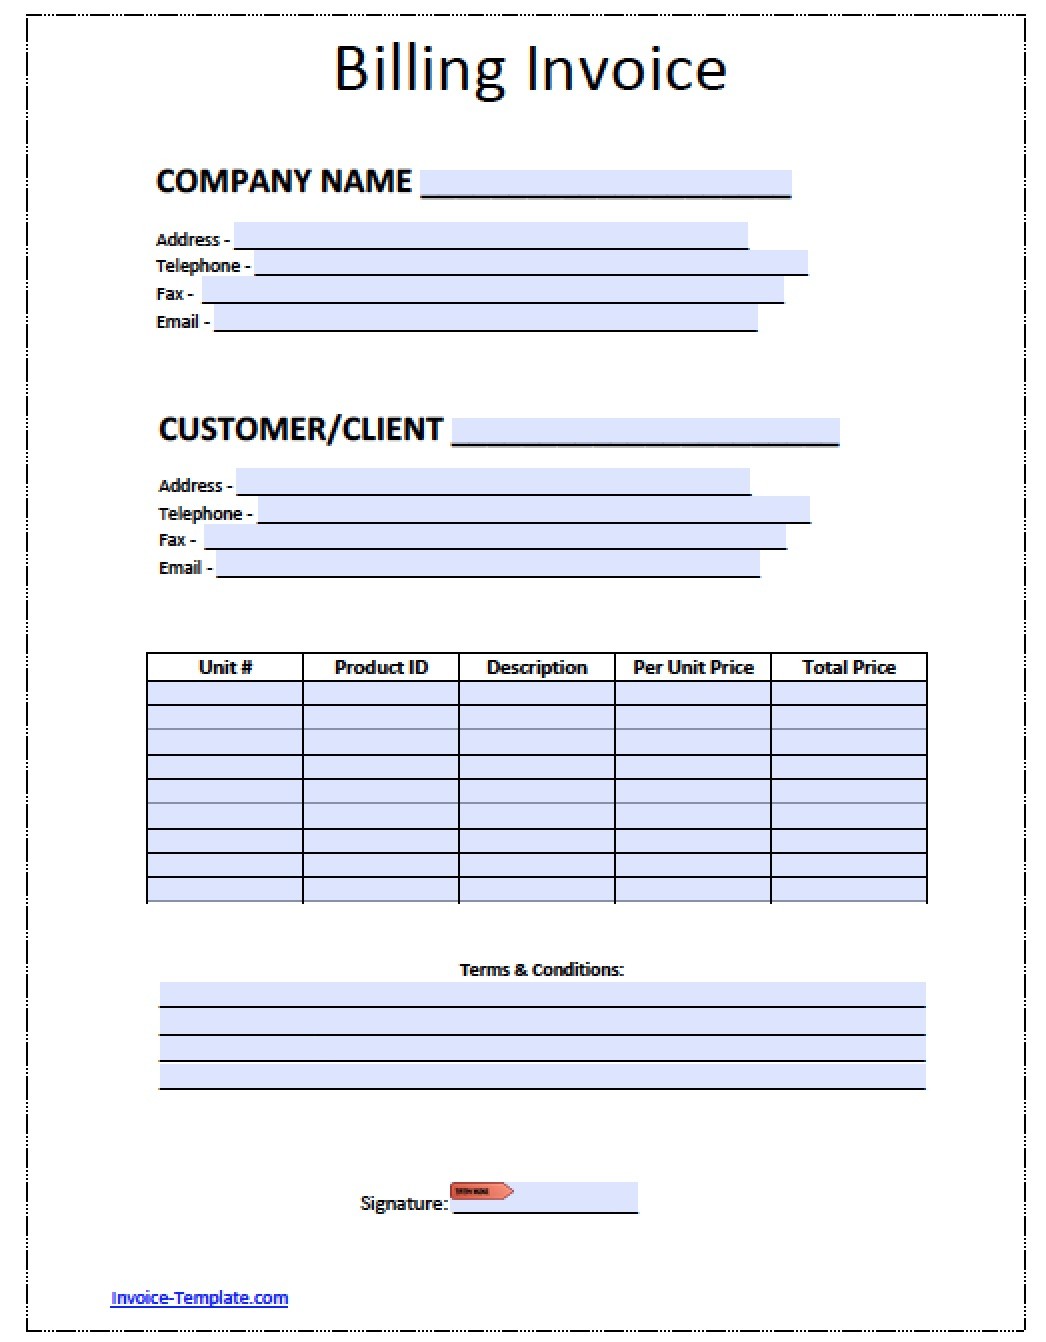 Free Blank Invoice Templates In PDF Word Excel Document Plain Template